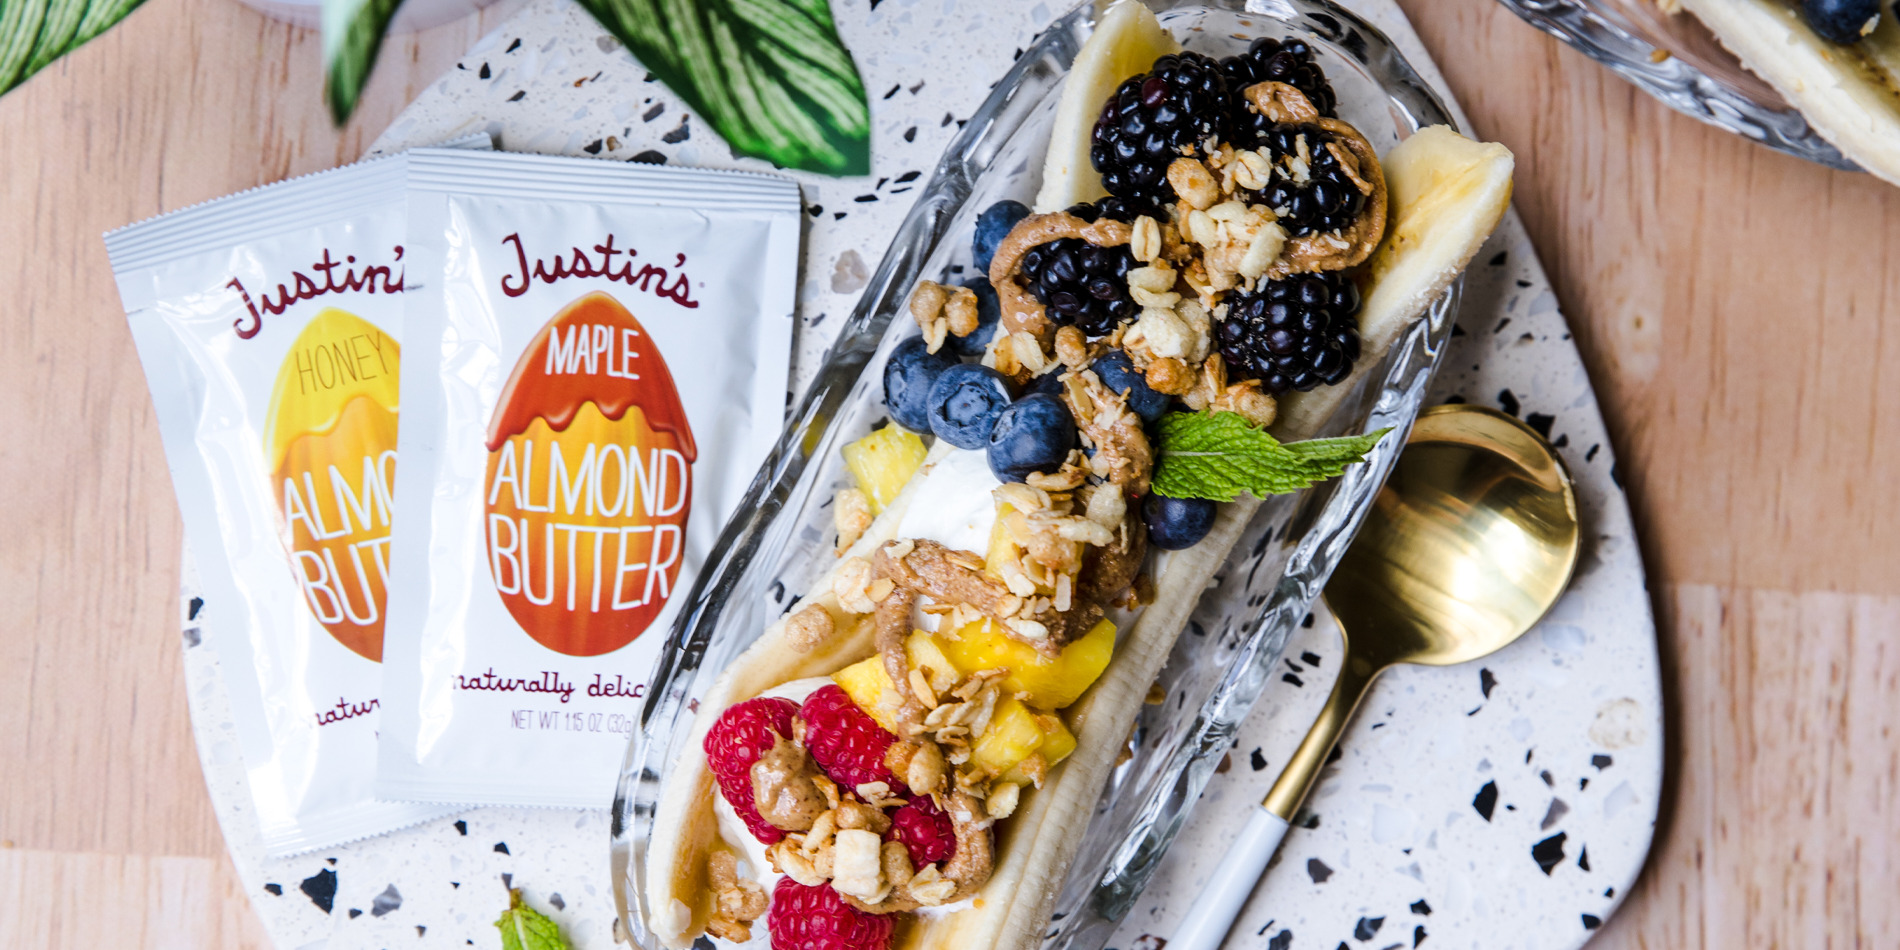 Banana split with peanut butter, fruit and granola on top.